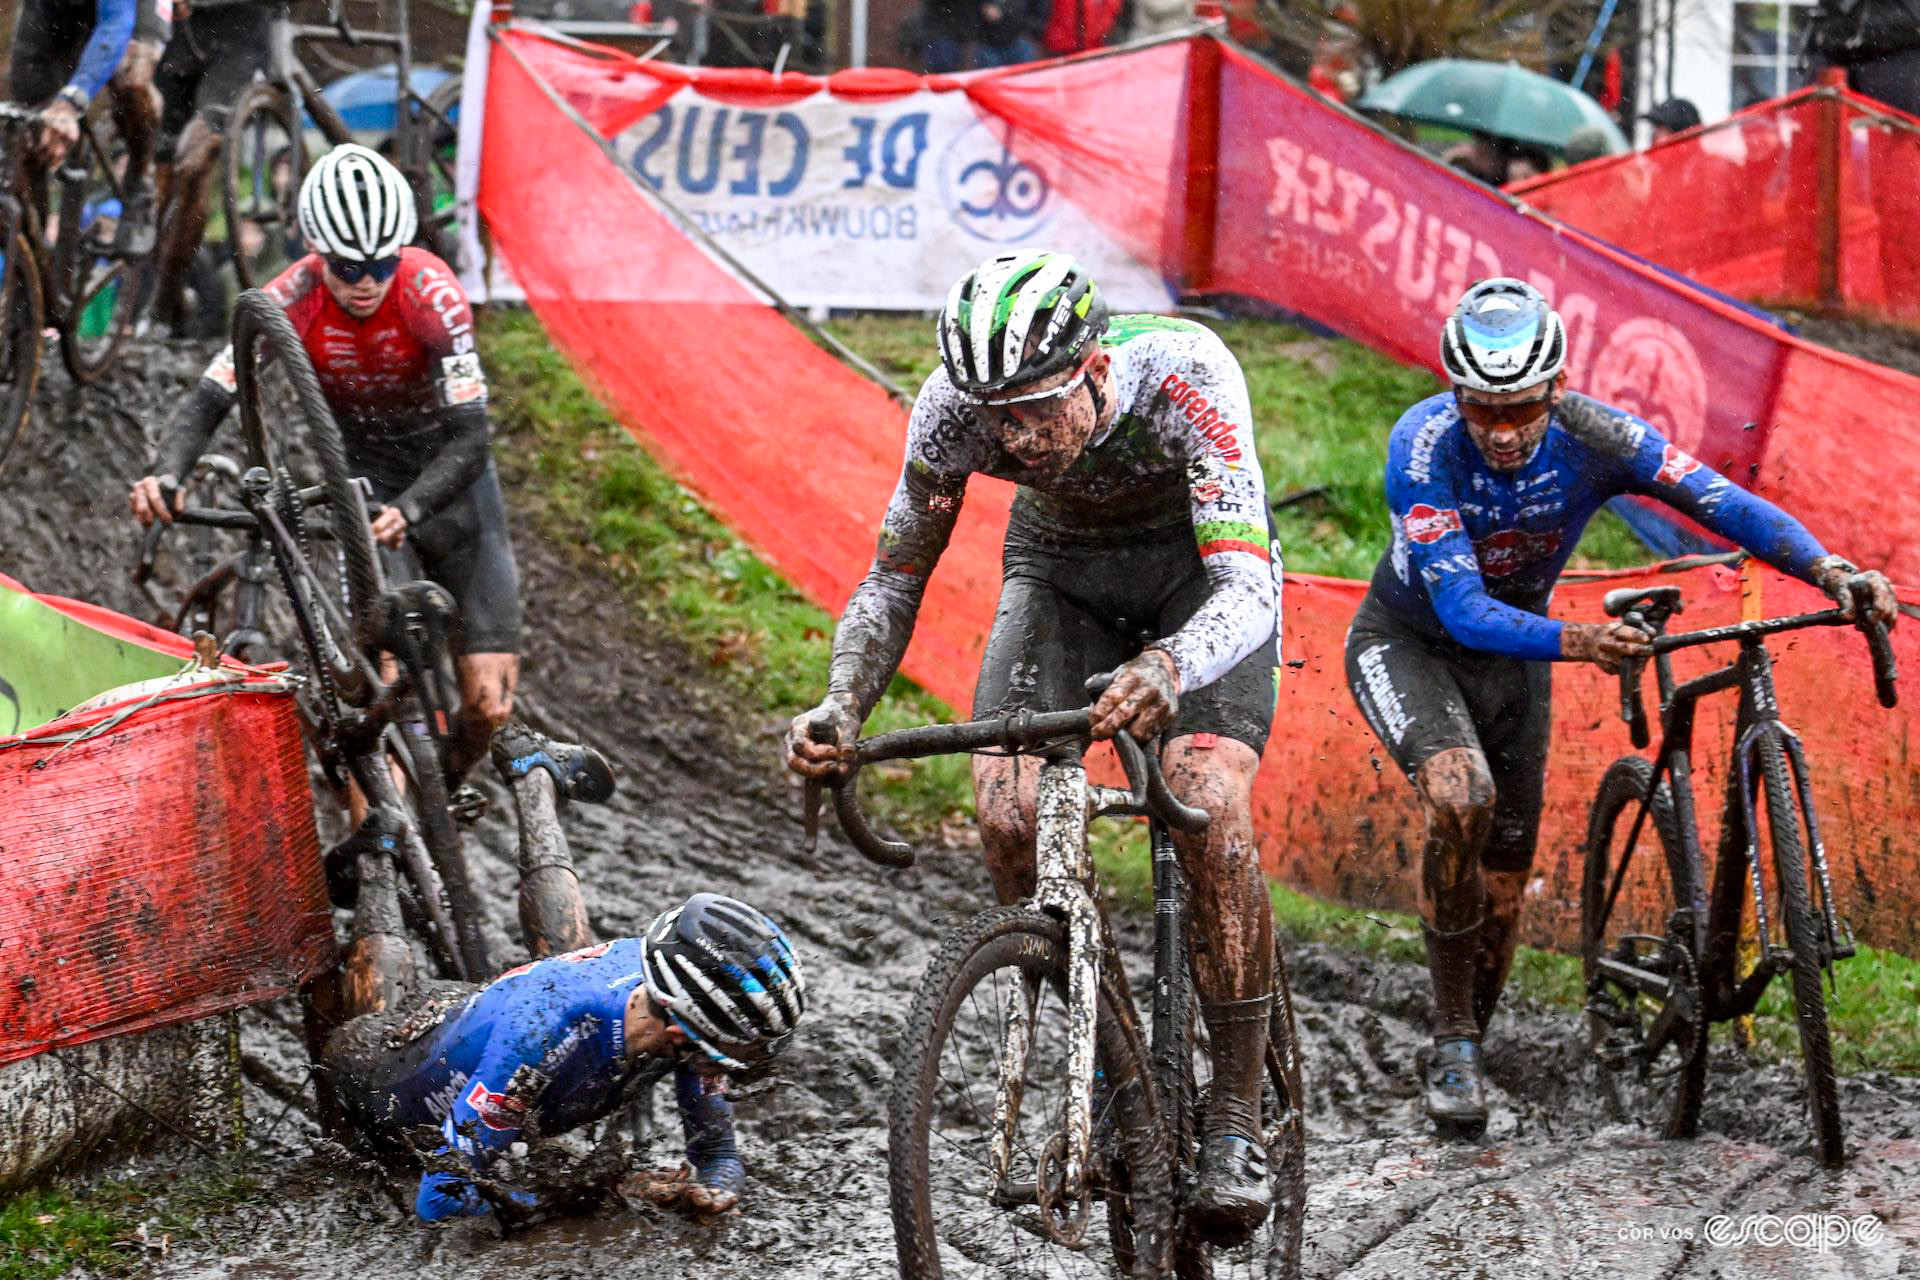 Riders work their way around a muddy corner as Jente Michels crashes into the sticky mud during Exact Cross Loenhout Azencross.